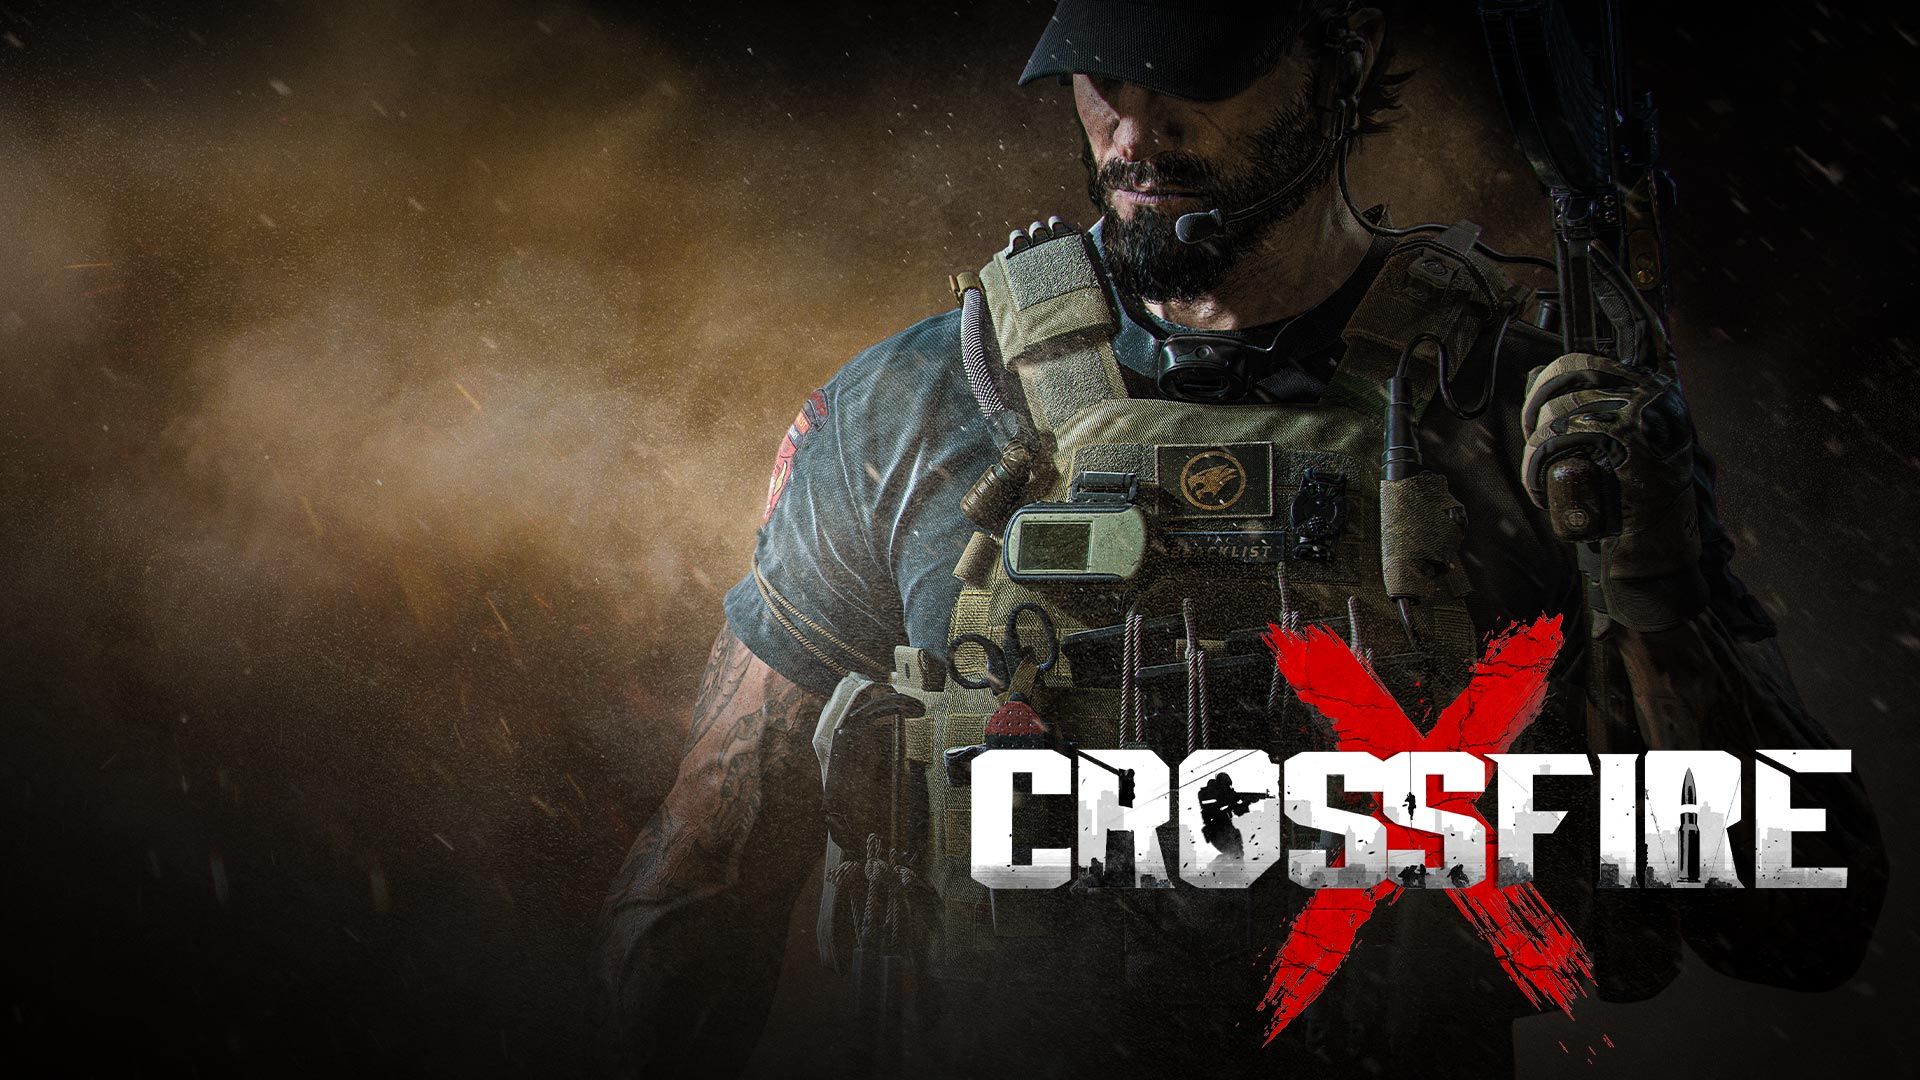 CrossFire X - Xbox Exclusive Games in 2022